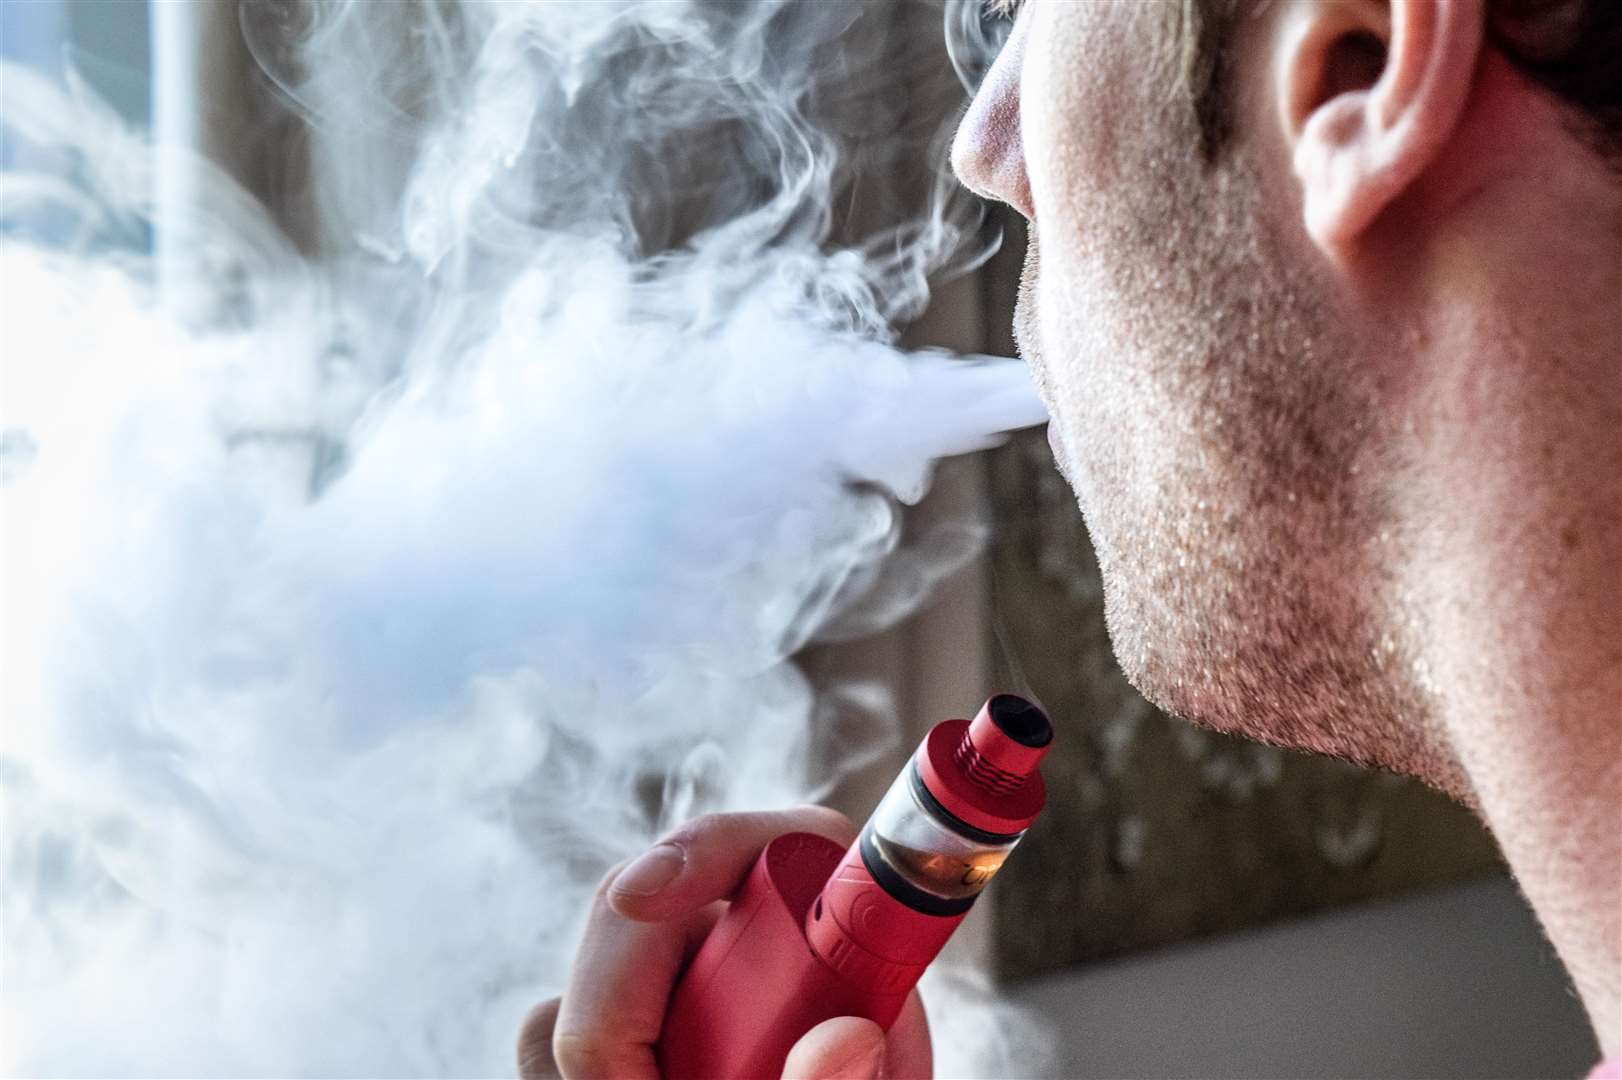 Vaping is not advised as a long-term alternative to smoking. Picture: Vaping360